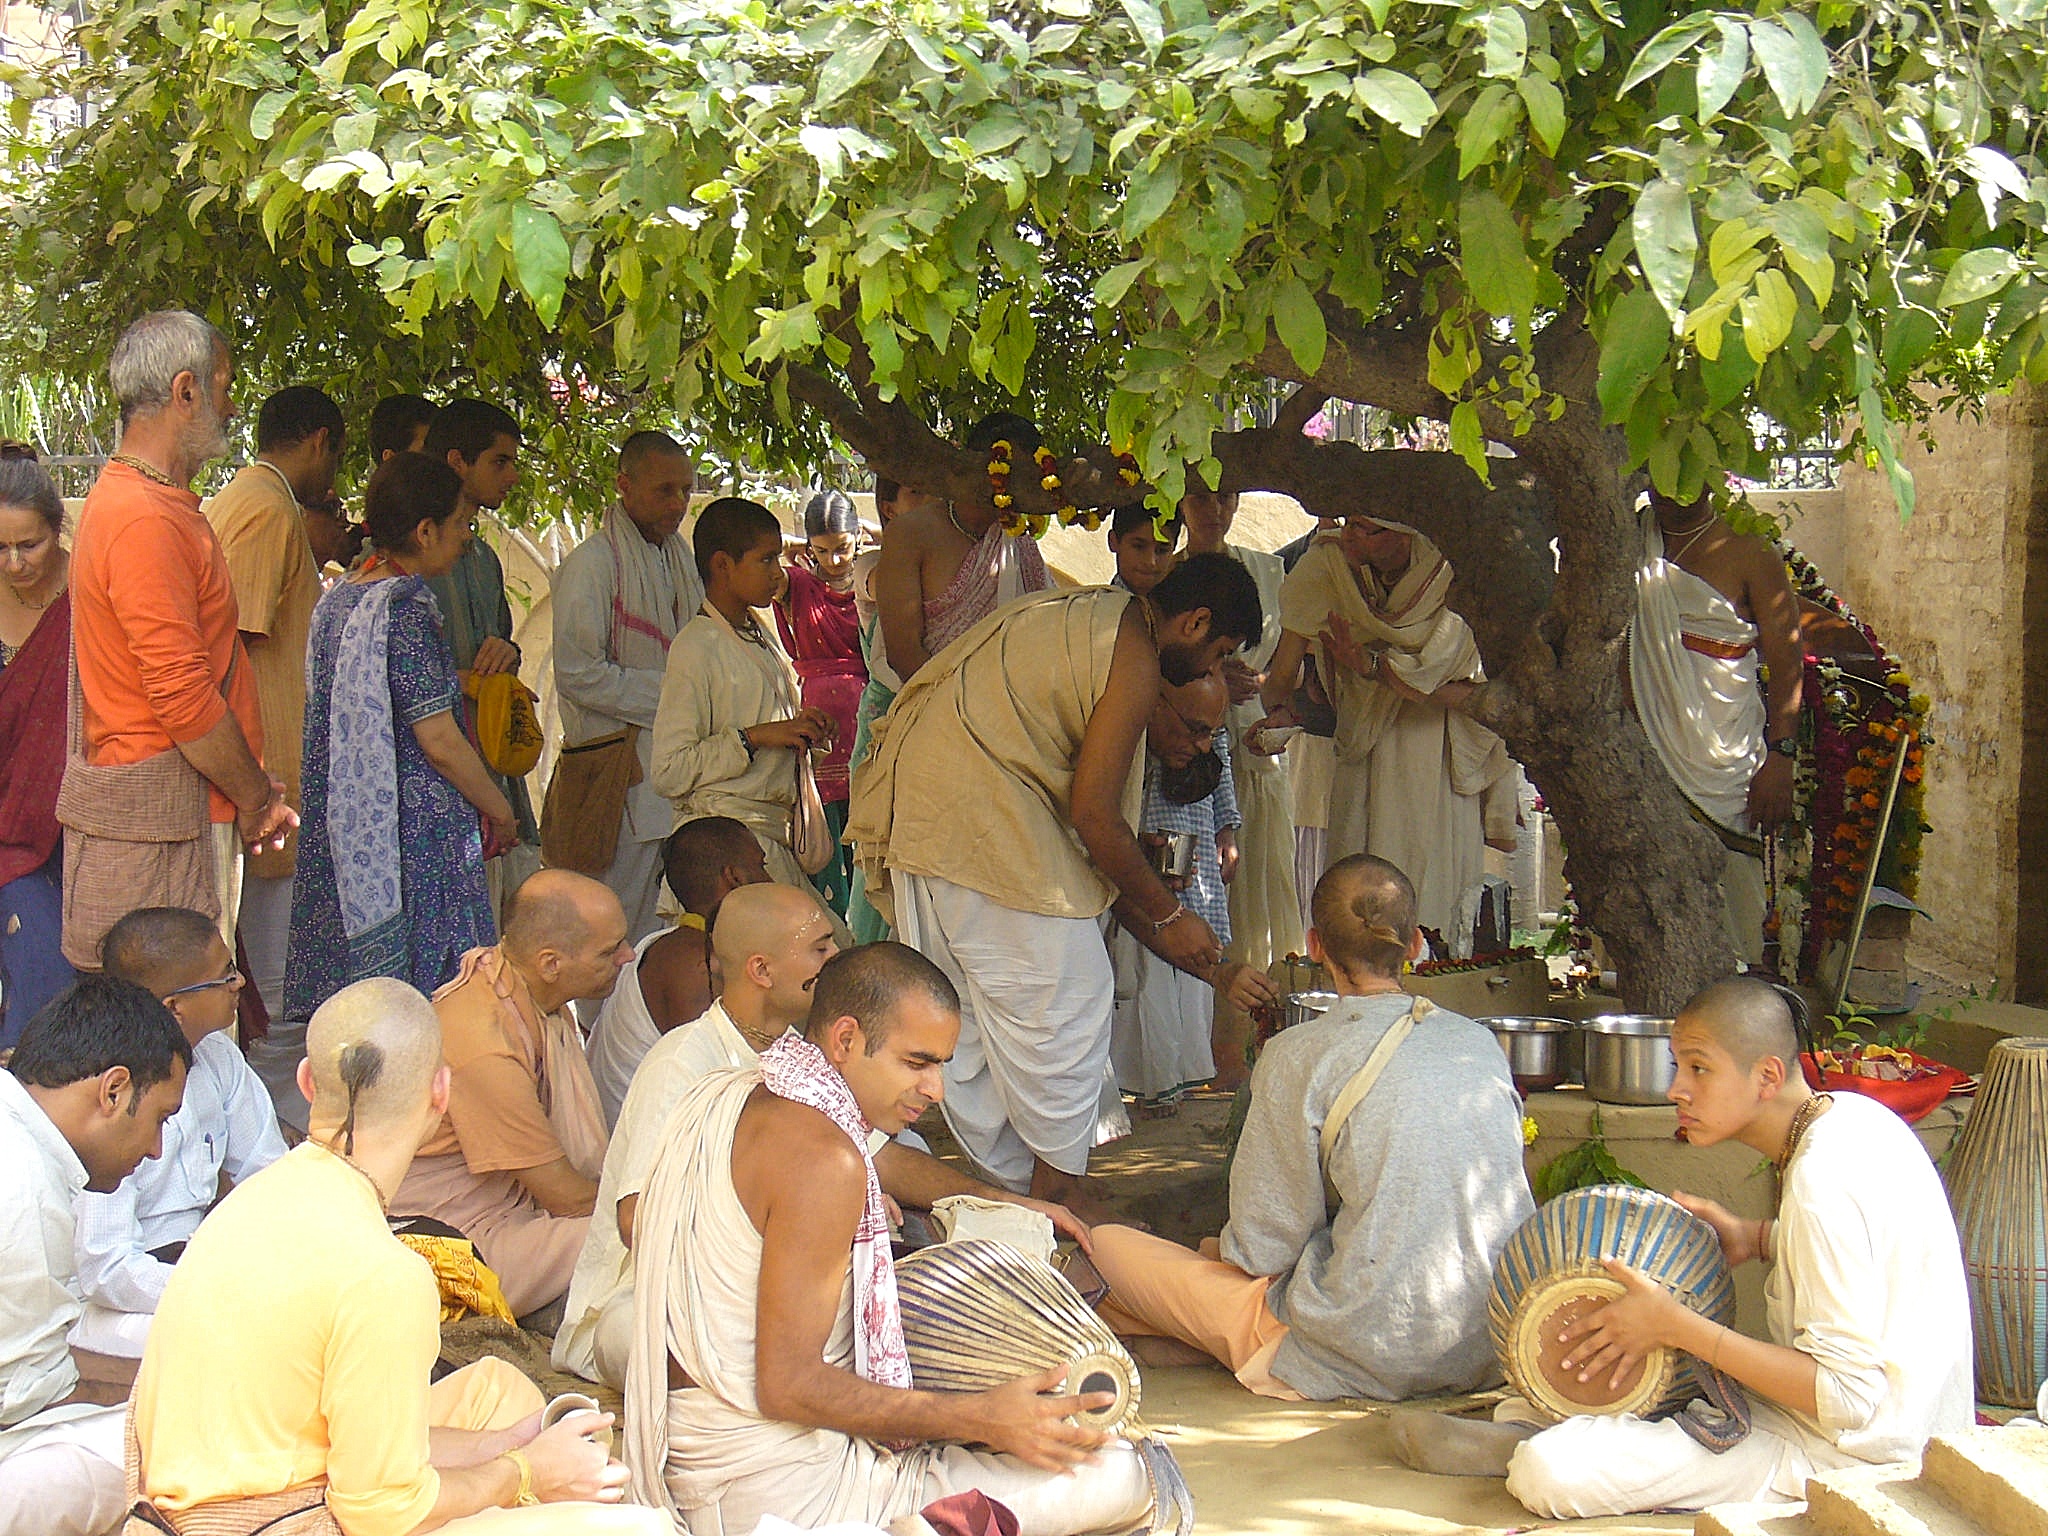 Devotees at a courtyard festival